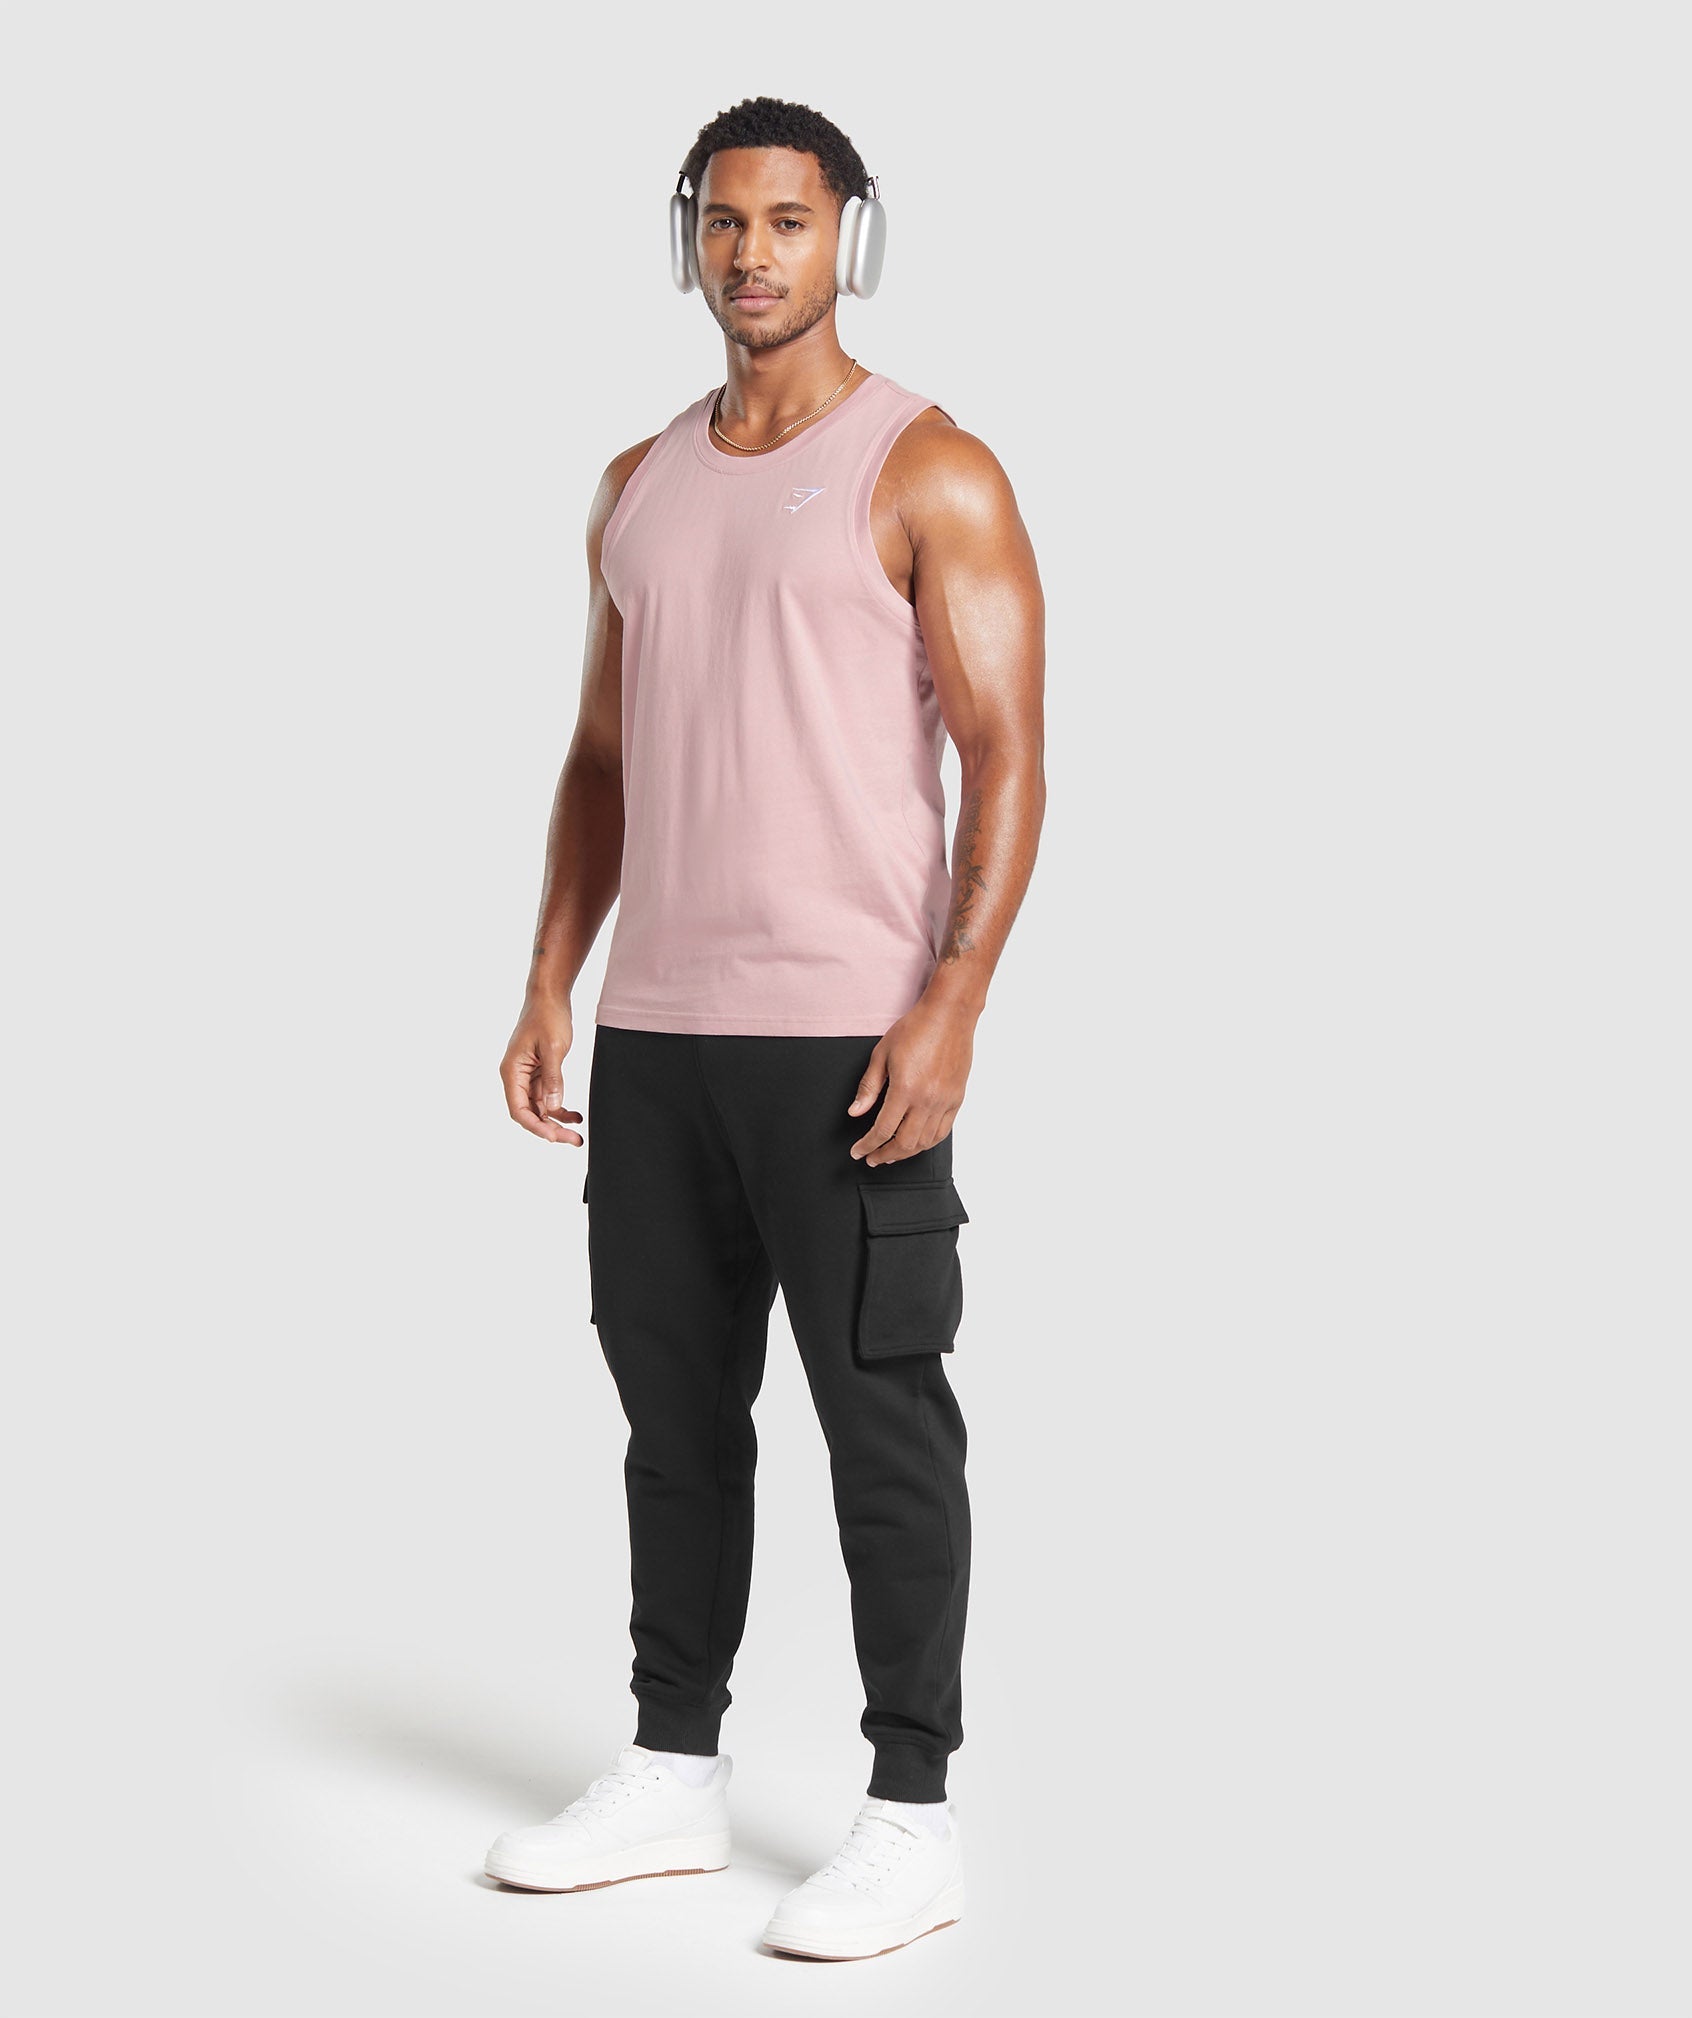 Crest Tank in Light Pink - view 4